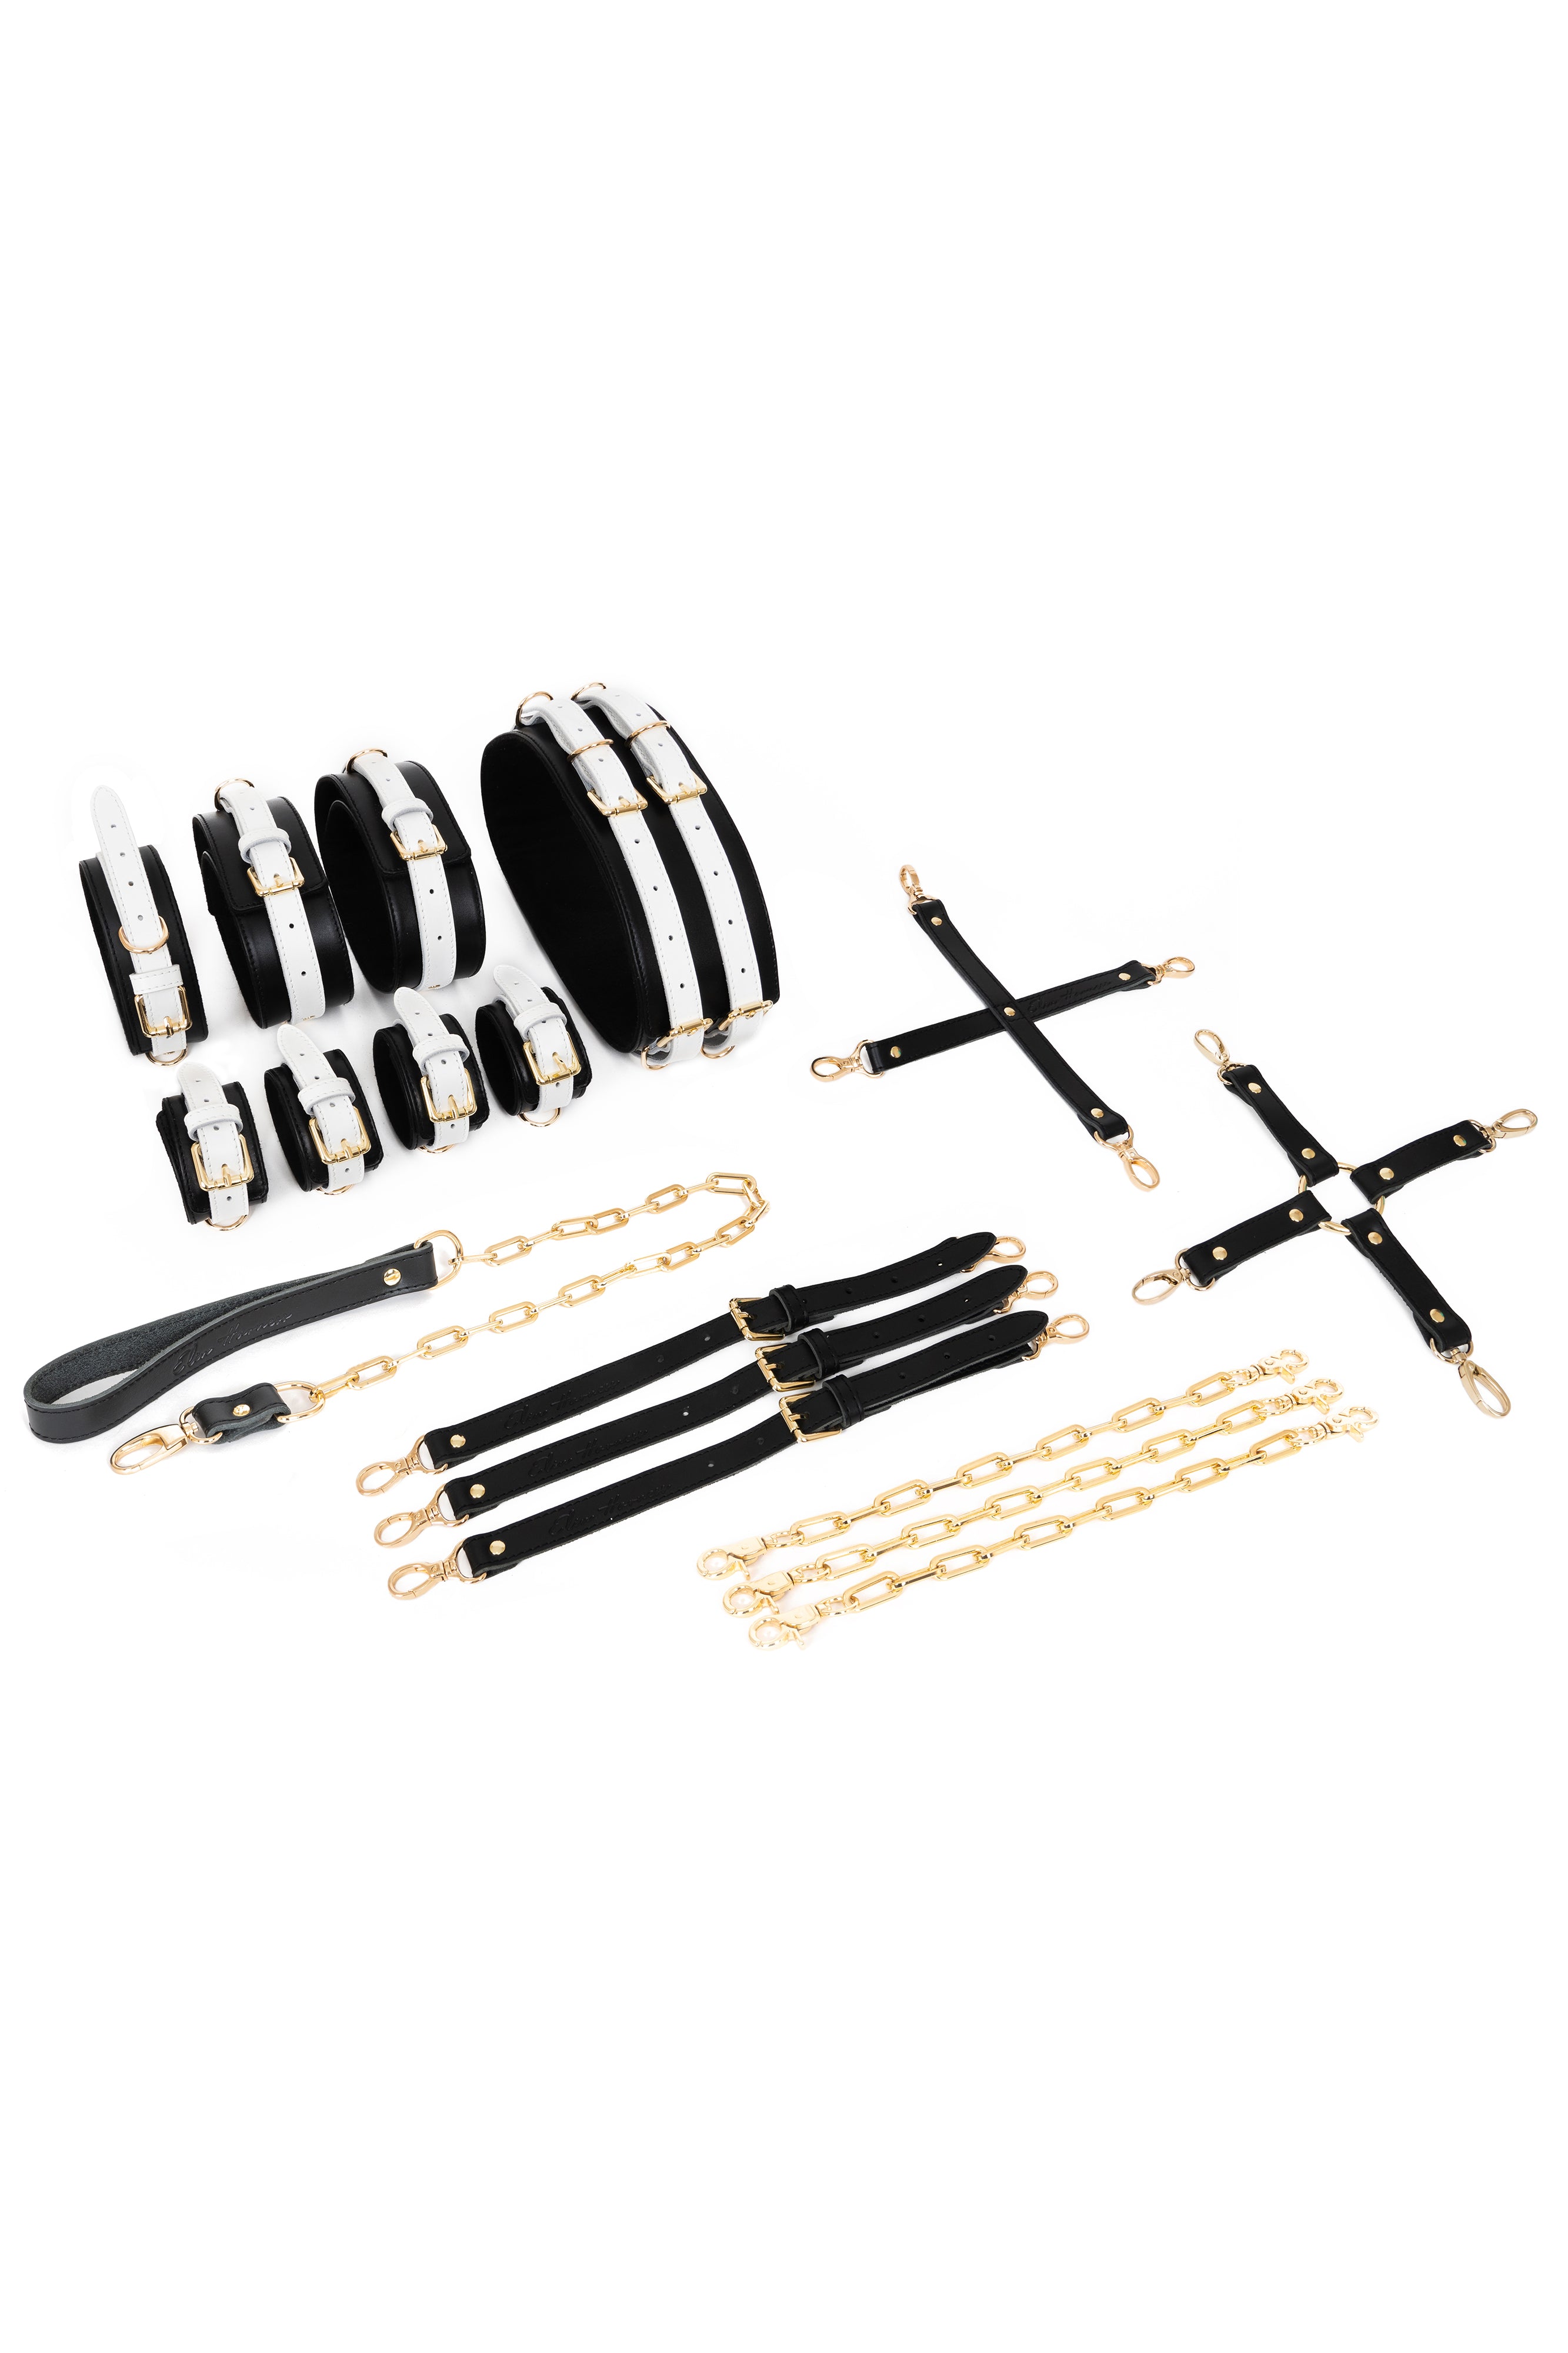 Black'n'White Full Leather Harness Bondage Set with Chain Connectors